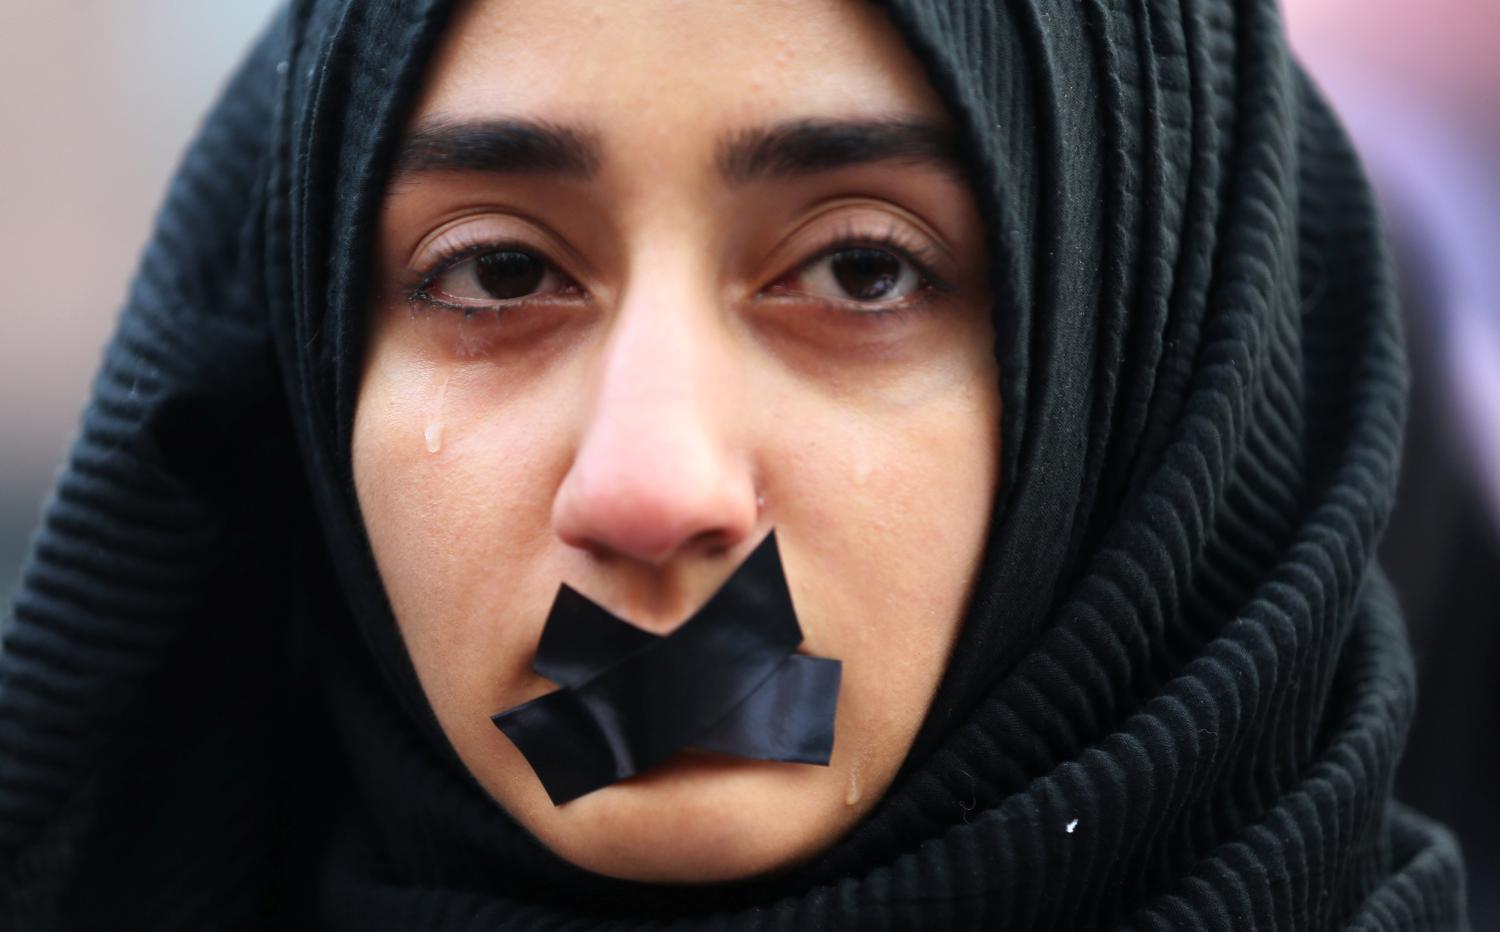 A Turkish student cries during a protest to show solidarity with trapped citizens of Aleppo, Syria, in Sarajevo, Bosnia and Herzegovina December 14, 2016. REUTERS/Dado Ruvic